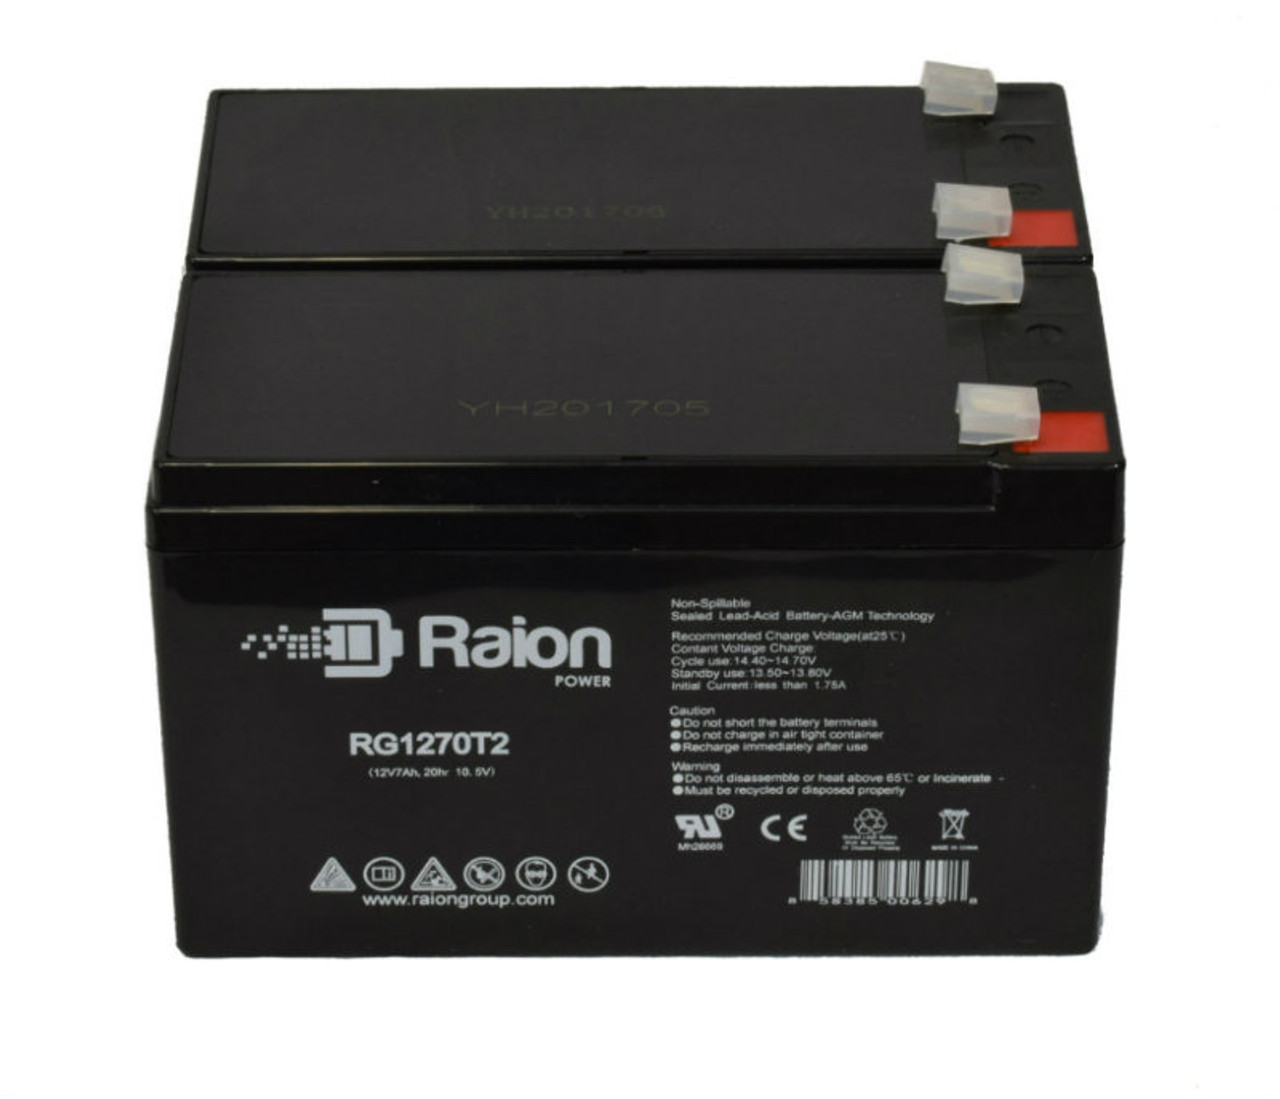 Raion Power Replacement RG1270T2 12V 7Ah Battery for Arjo-Century Bravo Ceiling Lift - 2 Pack